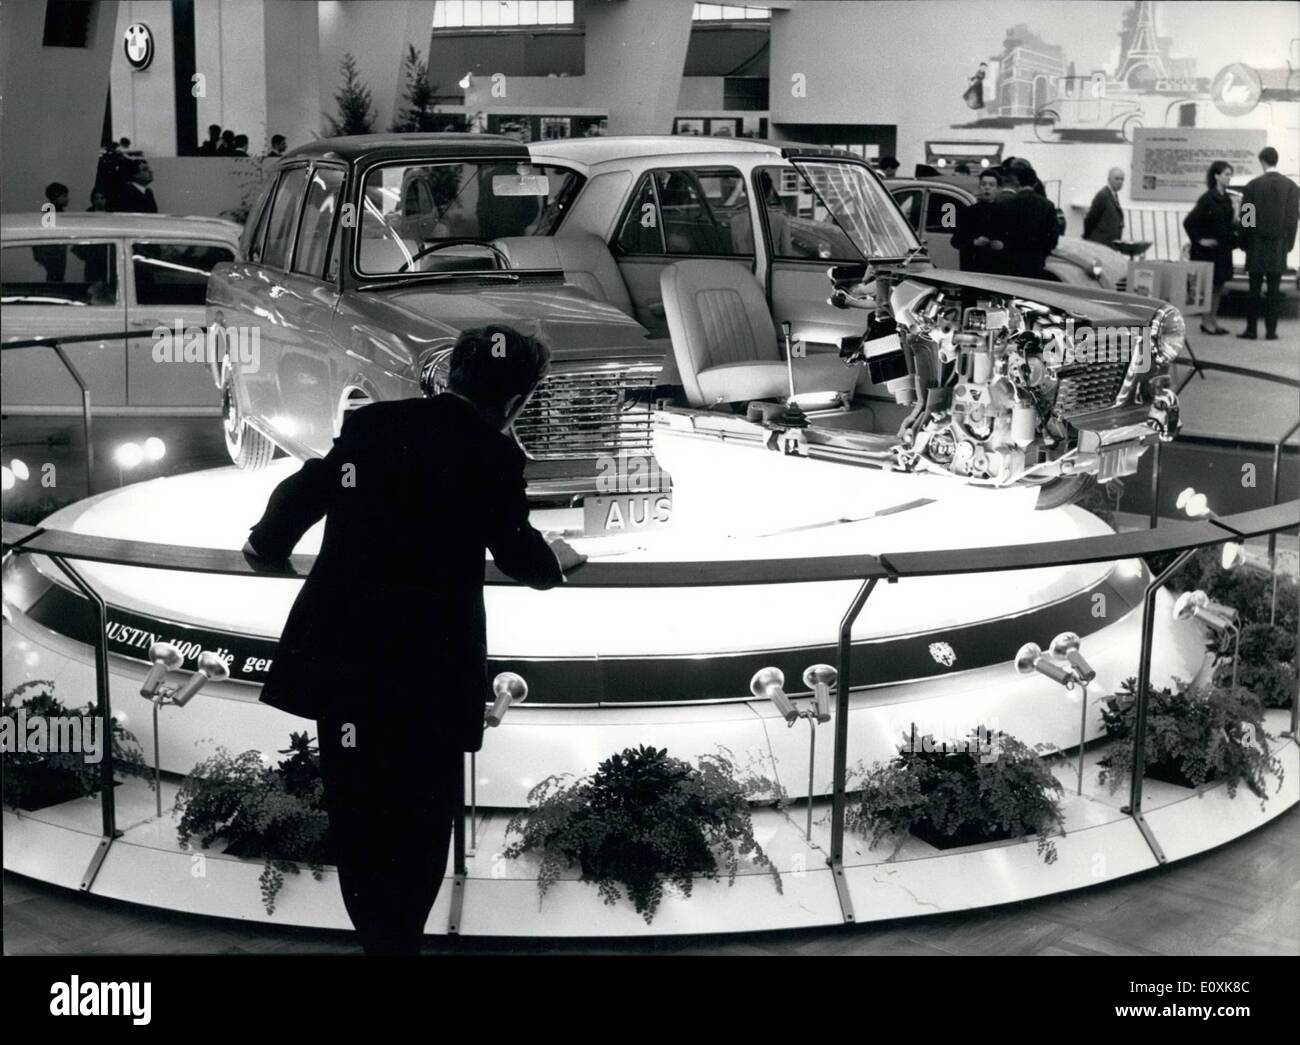 Mar. 03, 1967 - This interested onlooker is gazing at the Austin 1100, which is on display at the Geneva. There is a cross section so interested onlookers can gaze at the inner workings of the car. Golda Meir & Israel's Delegation at 25th UN Anniversary Stock Photo